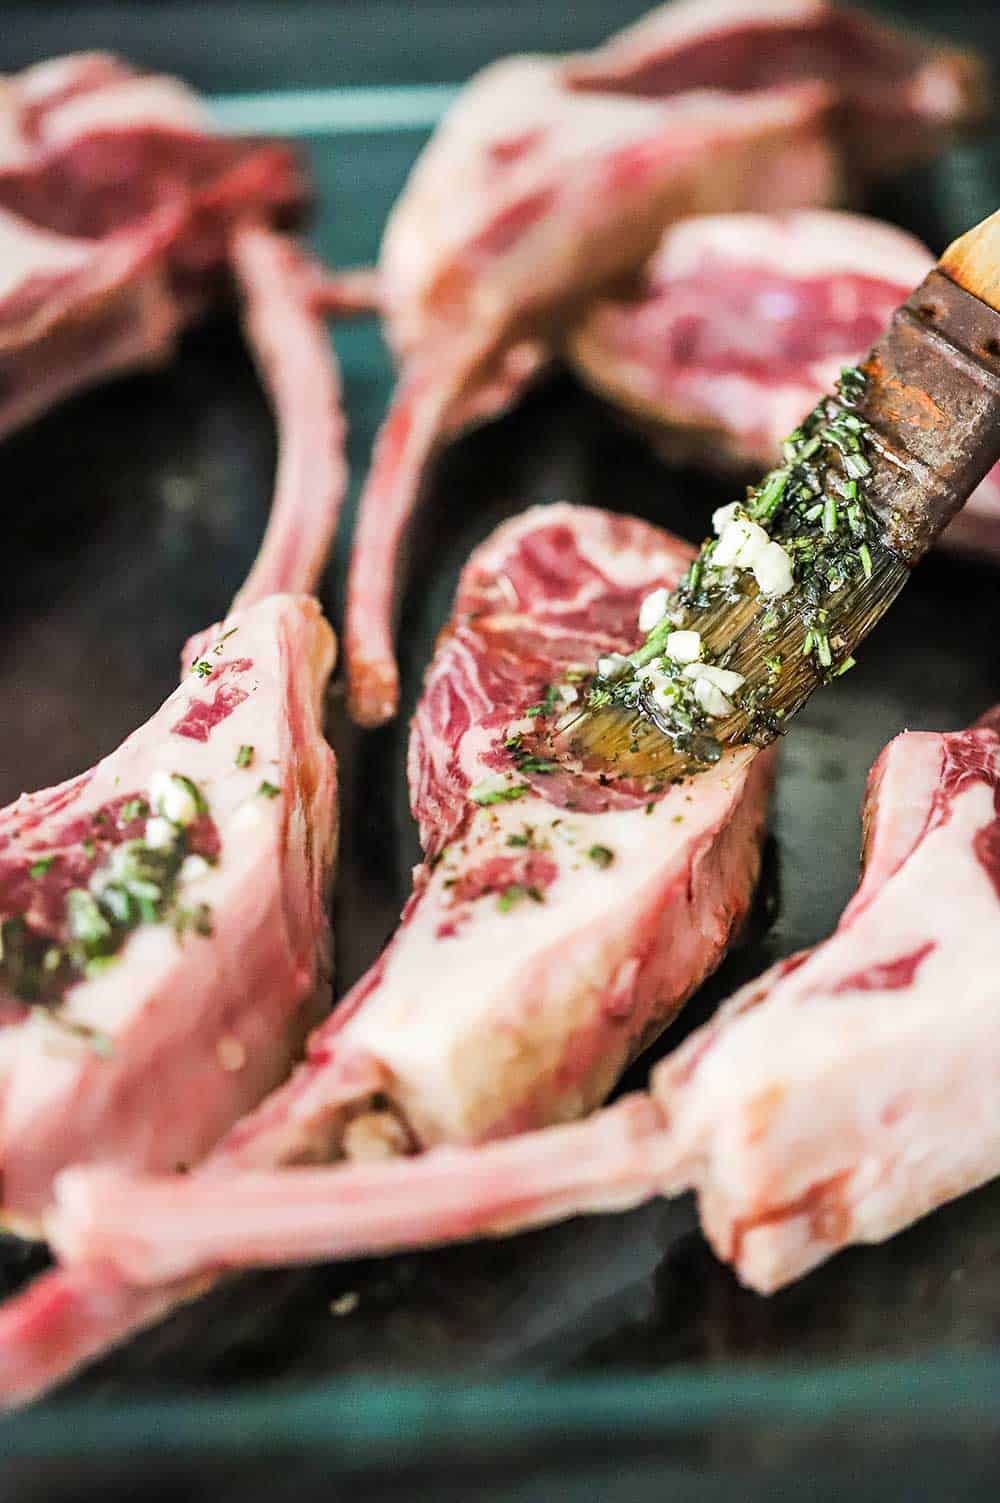 A brush being used to apply a garlic and herb marinade onto uncooked lamb chops in a glass dish.